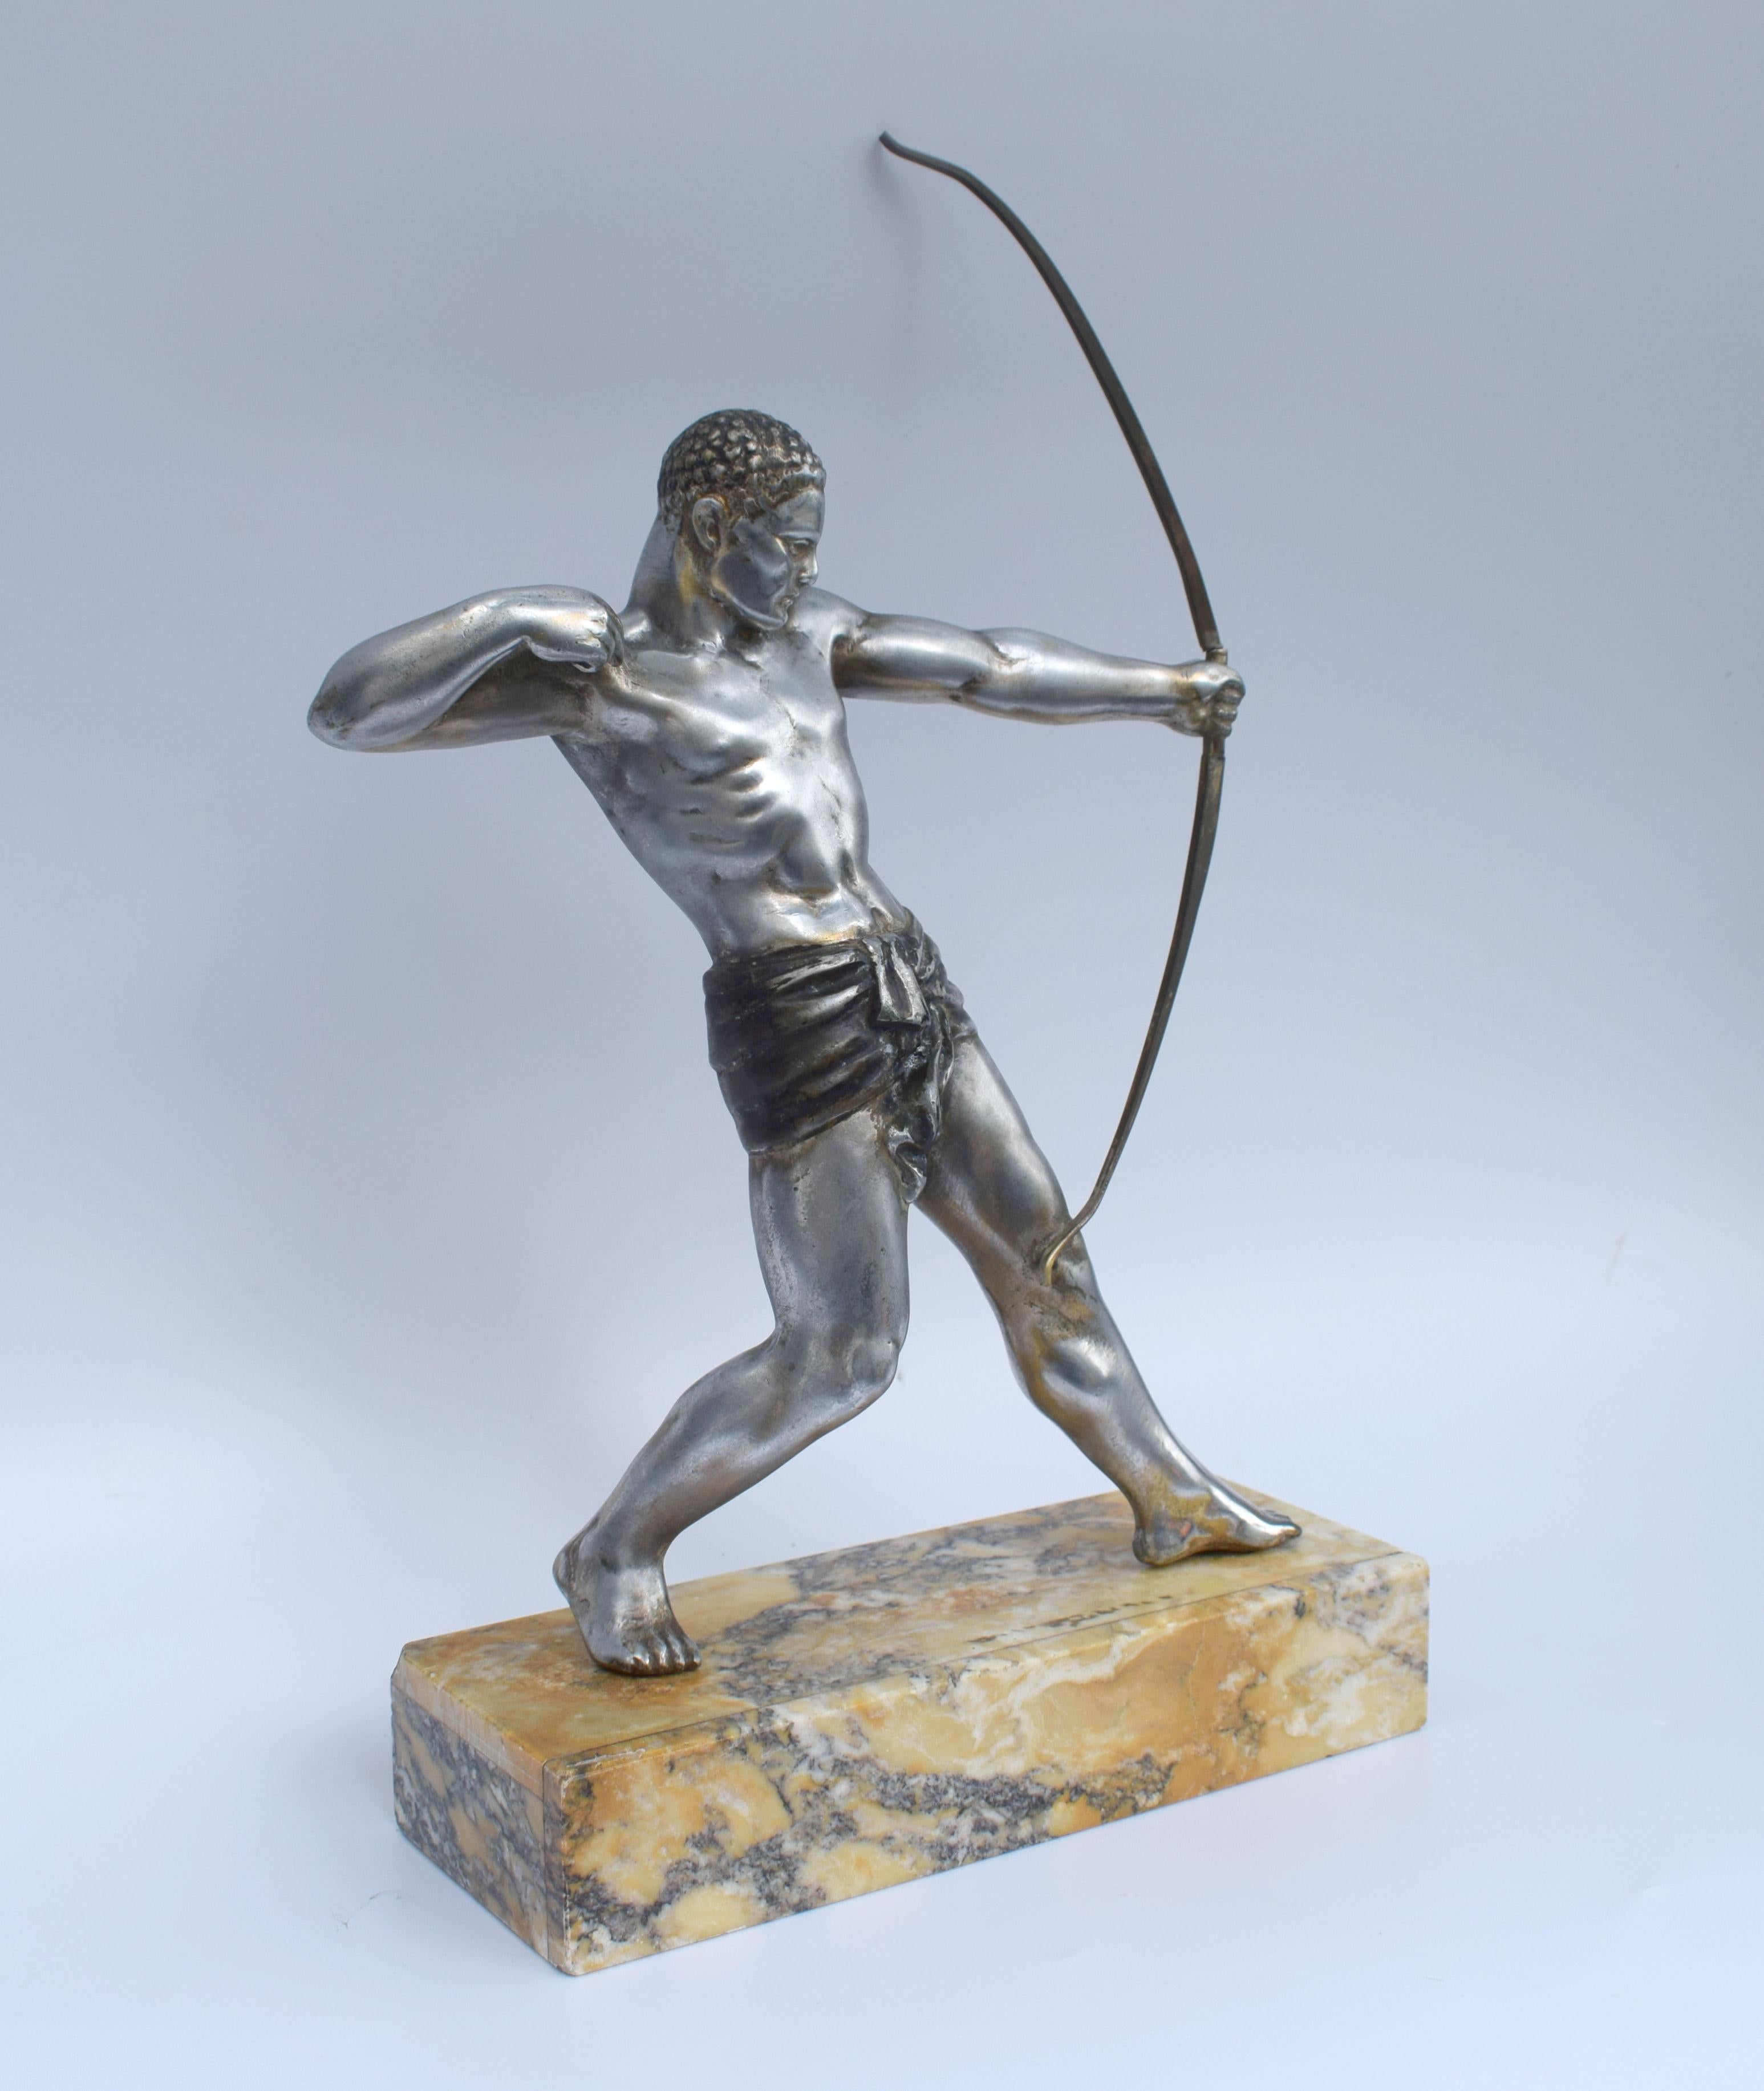 Superb 1930s Art Deco silvered spelter male semi nude figure on tri colored marble base. Not signed but sourced in France. Superb detailing and craftsmanship. Condition is very good no flaws to mention, just regular signs of age.